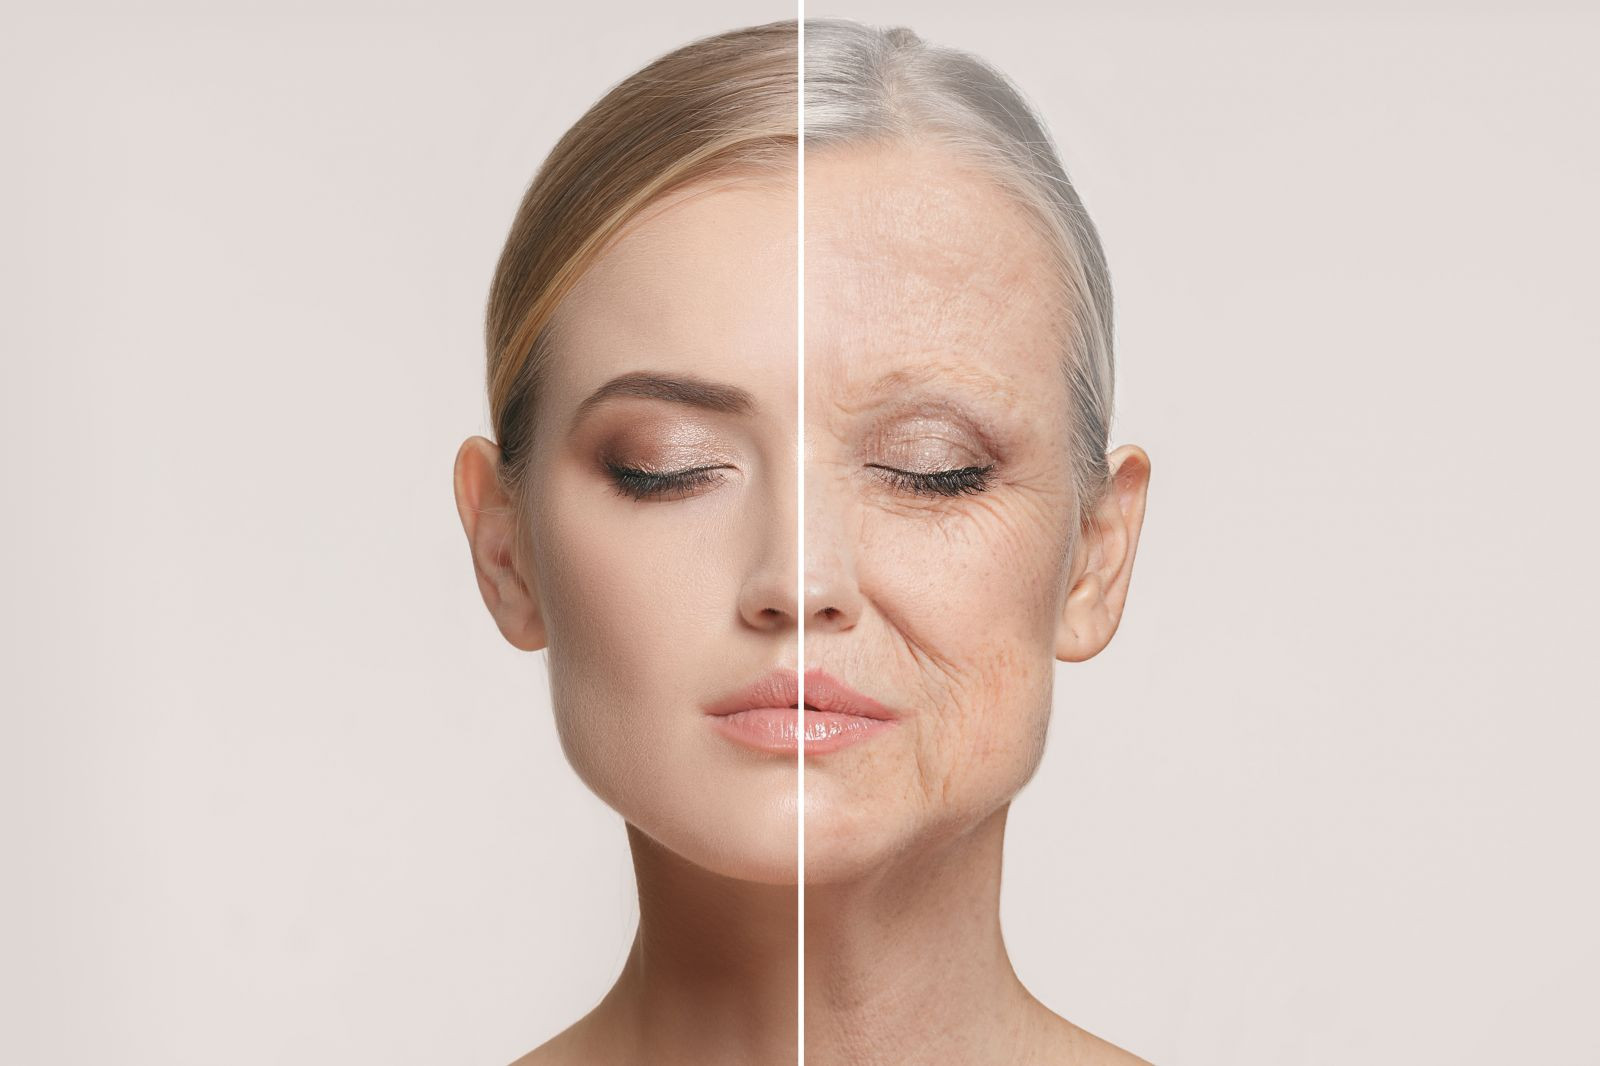 Slow down the ageing process with botox and dermal fillers and beautiful skin treatments